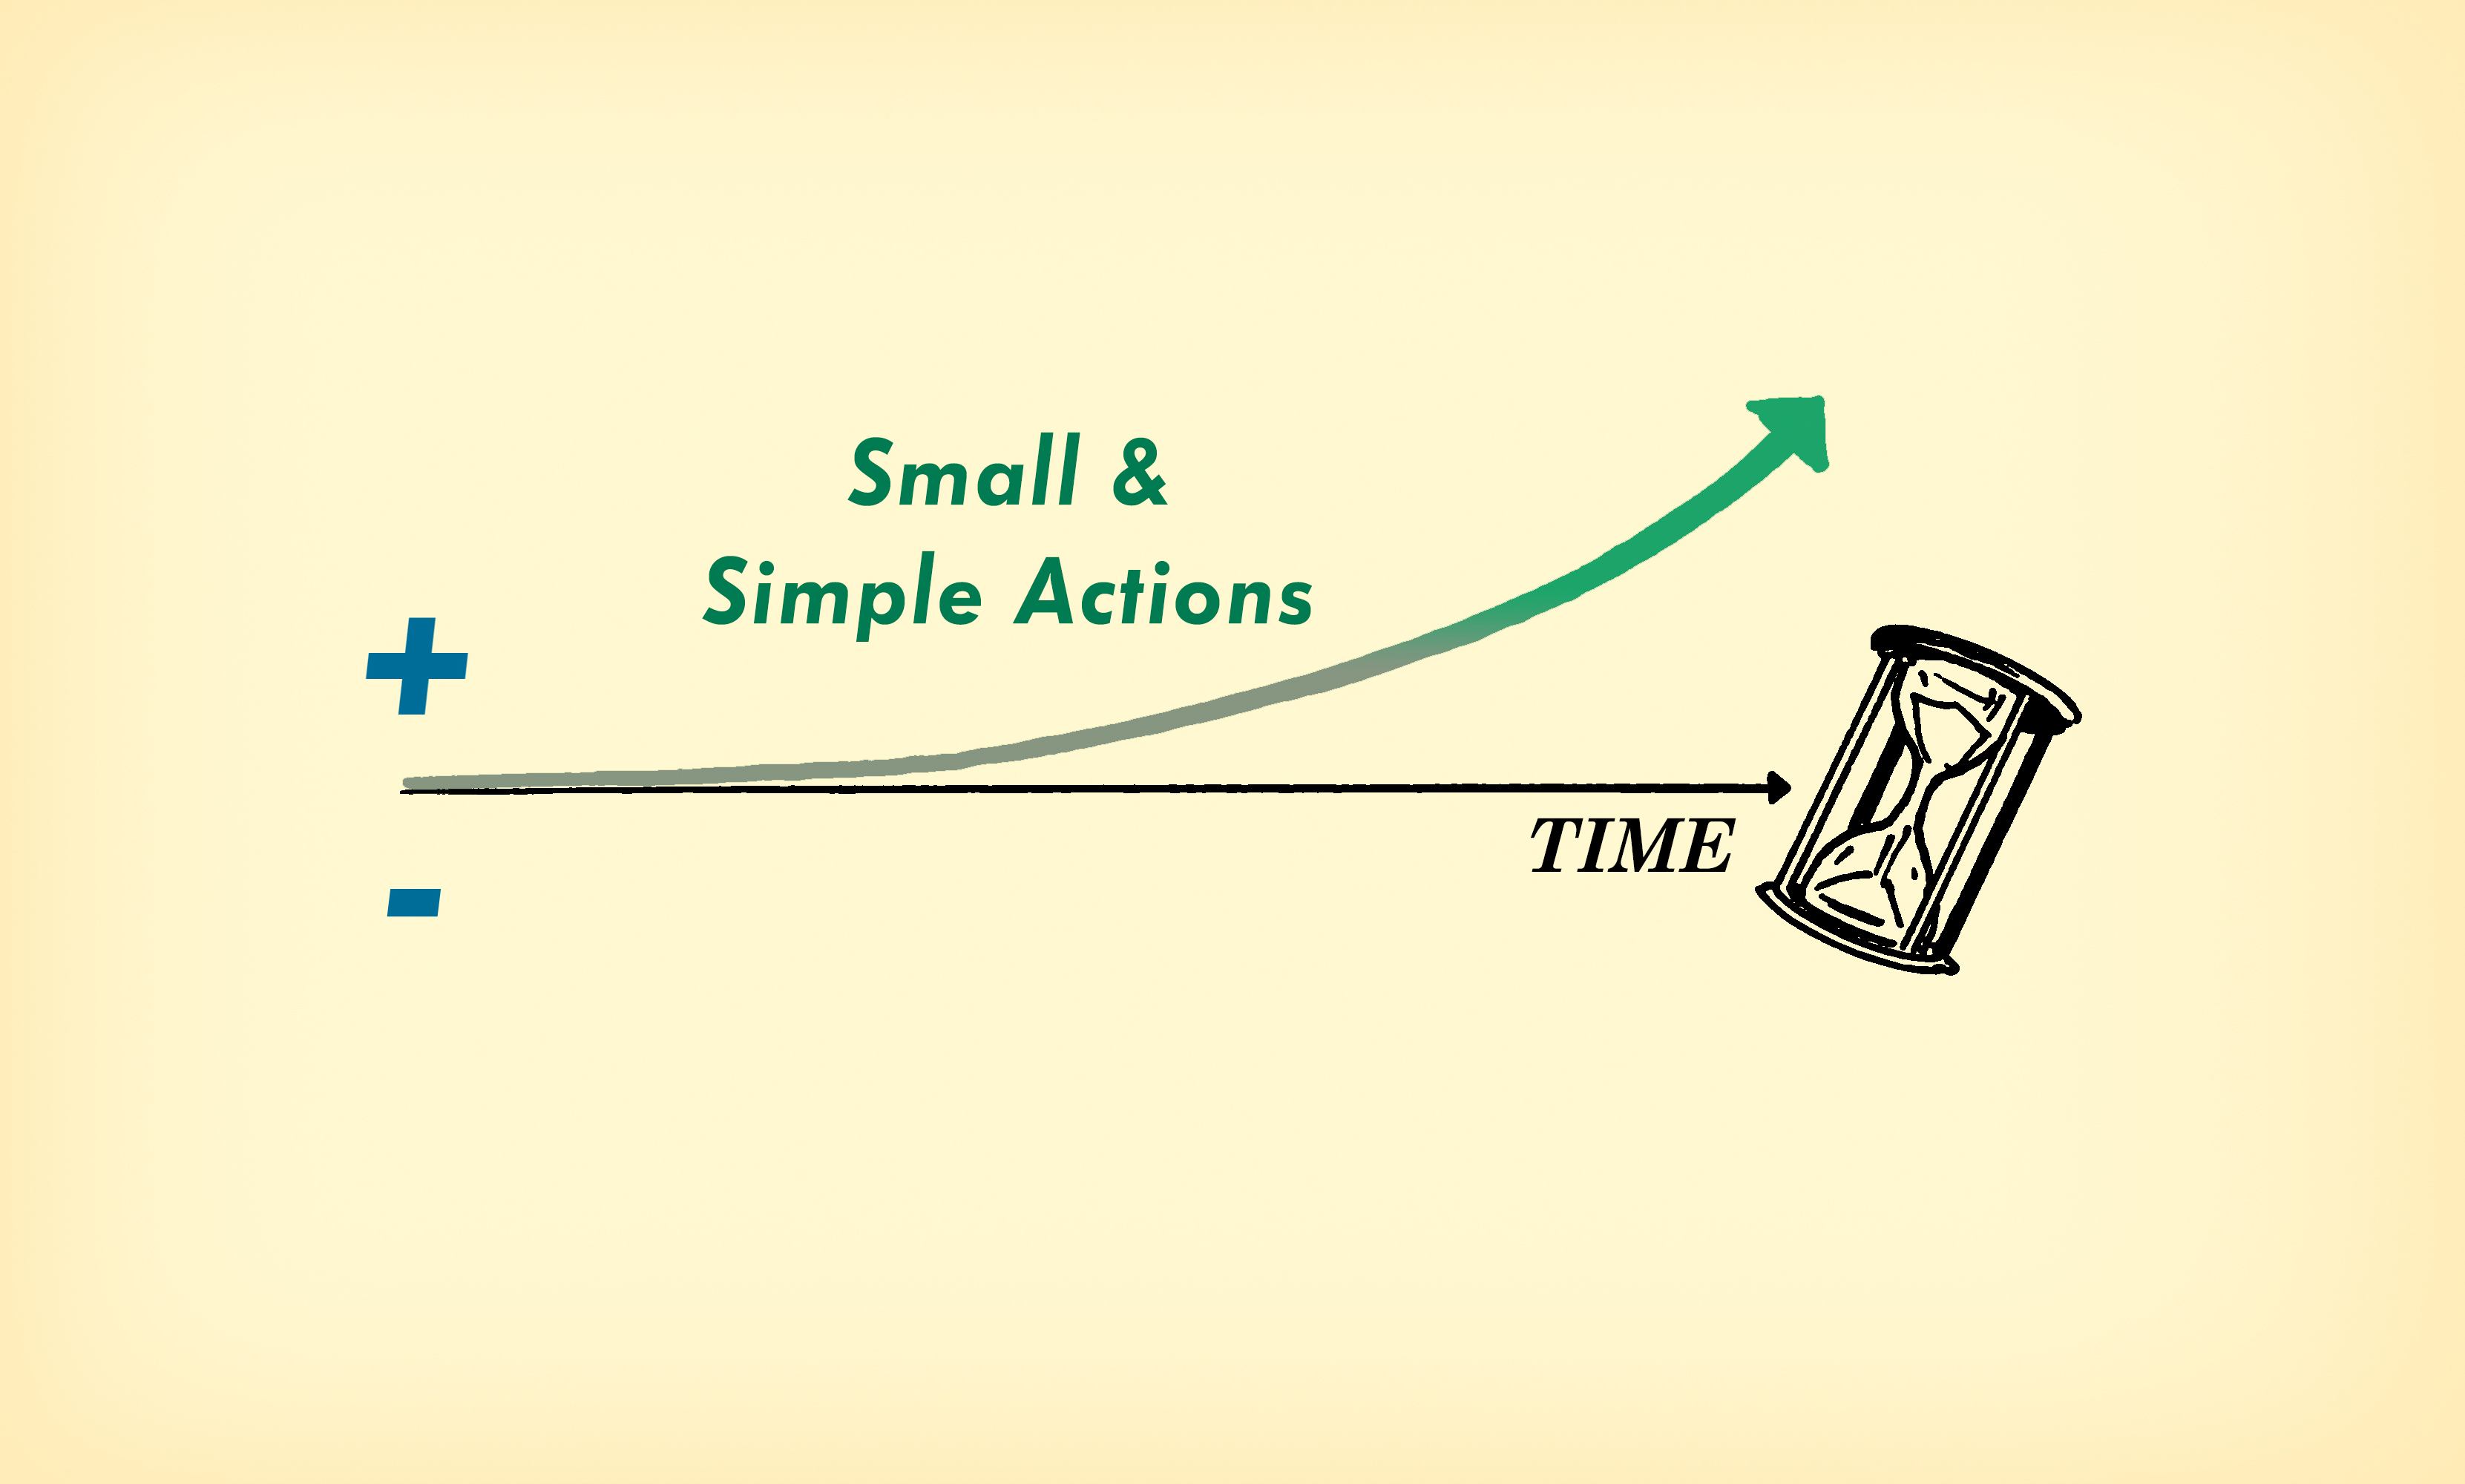 Simplifying small actions for self-improvement.